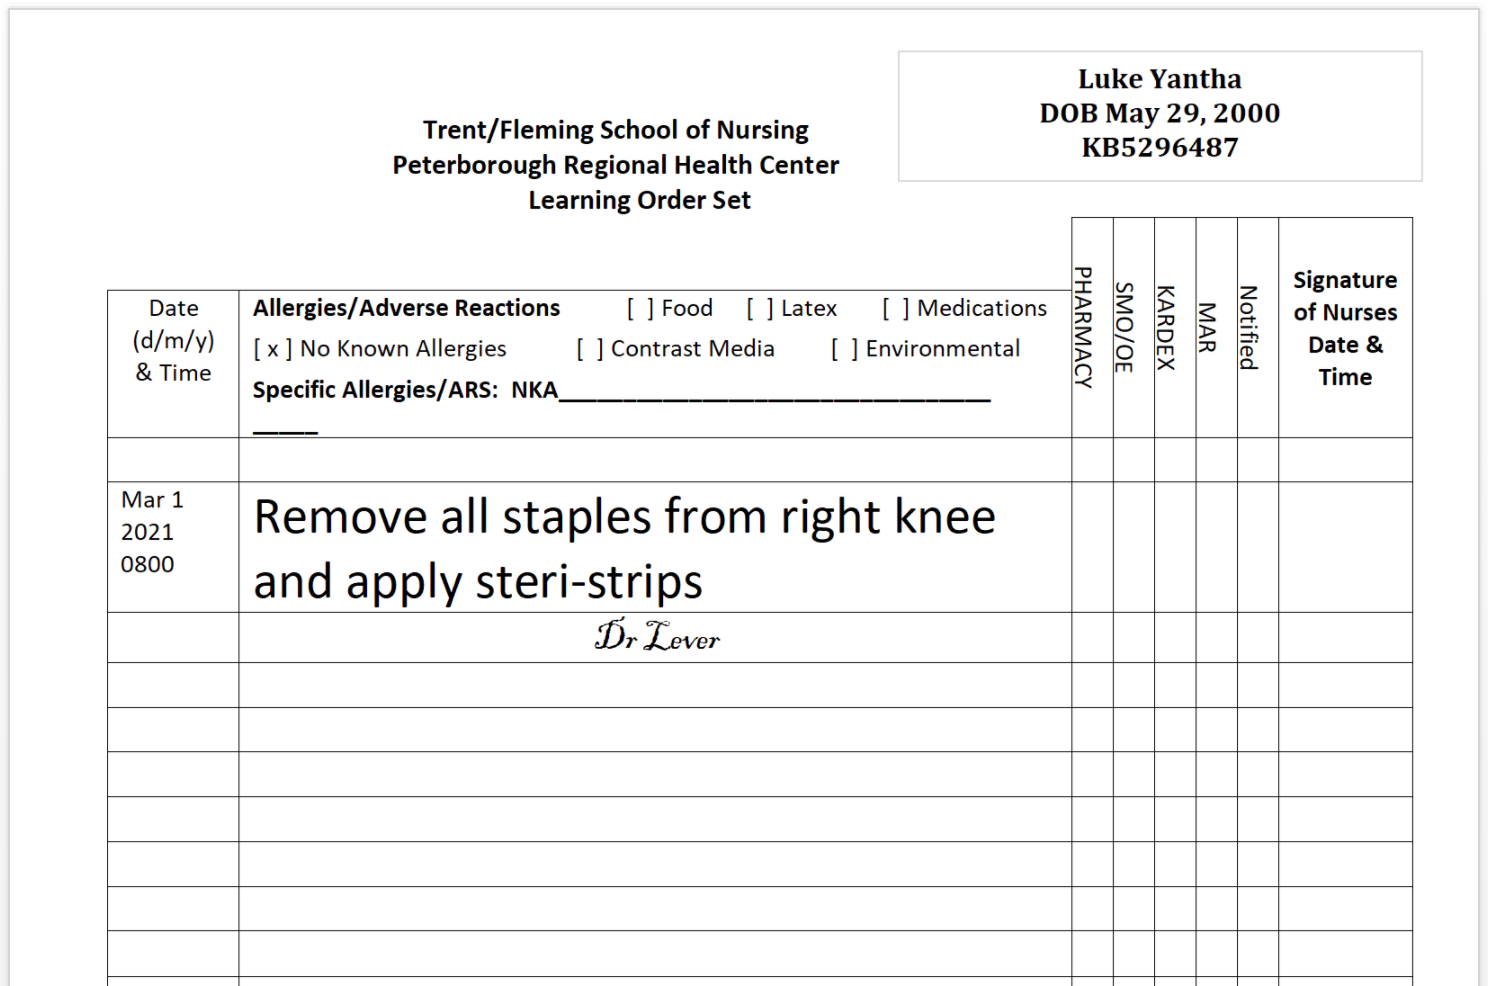 An example of a Learning Order Set form to remove all staples from the right knee and to apply steri-strips.